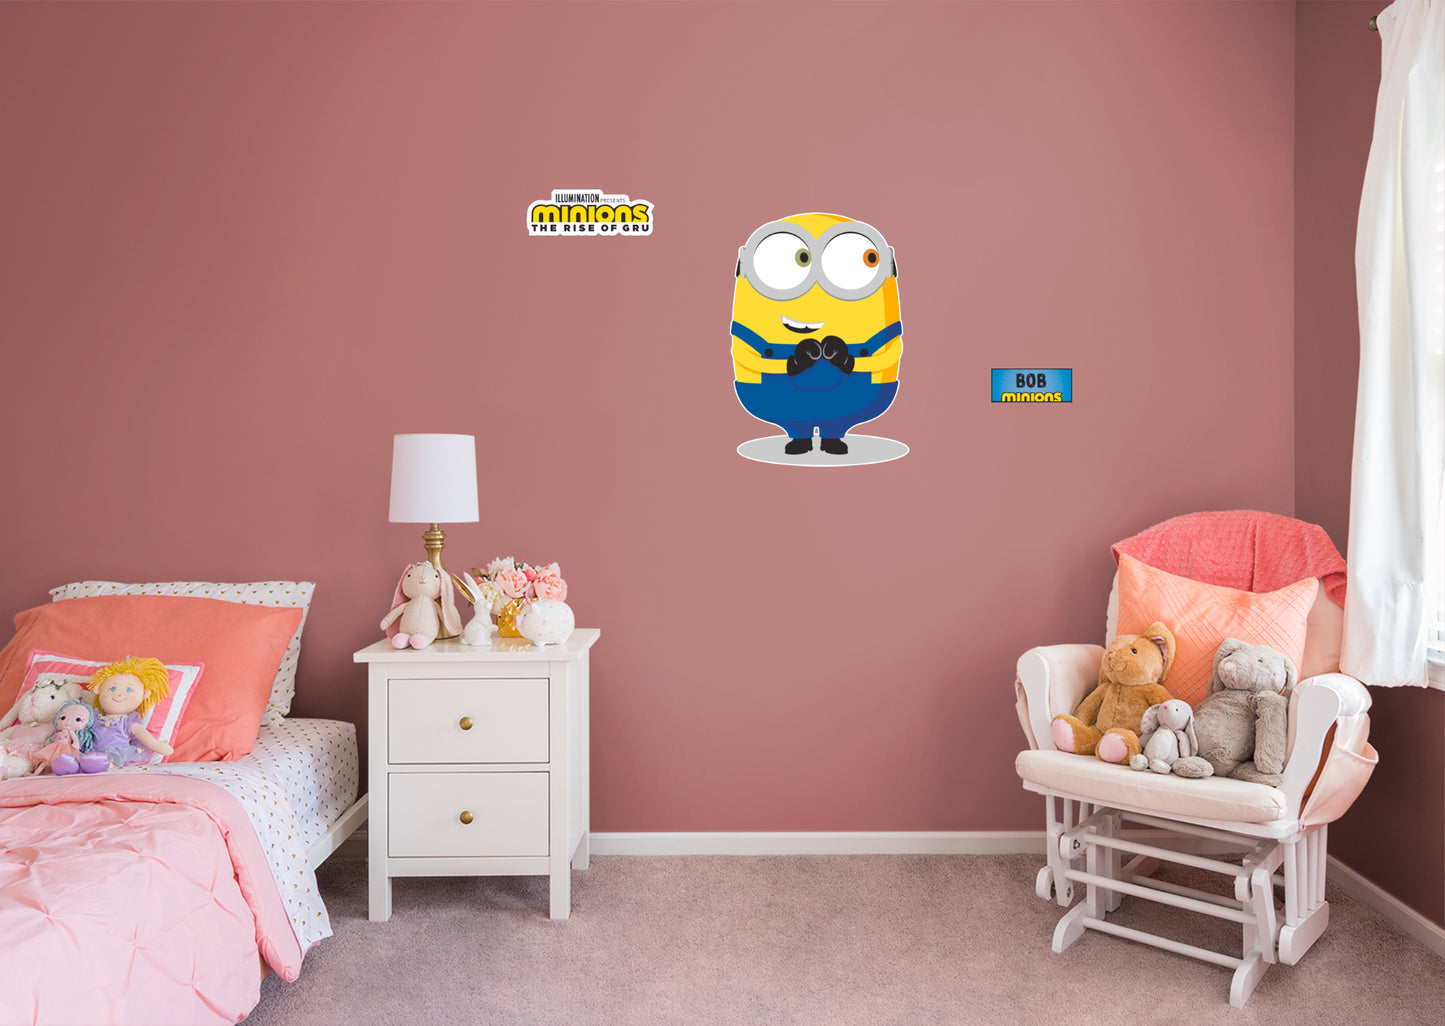 Minions: Bob - Officially Licensed NBC Universal Removable Adhesive Decal